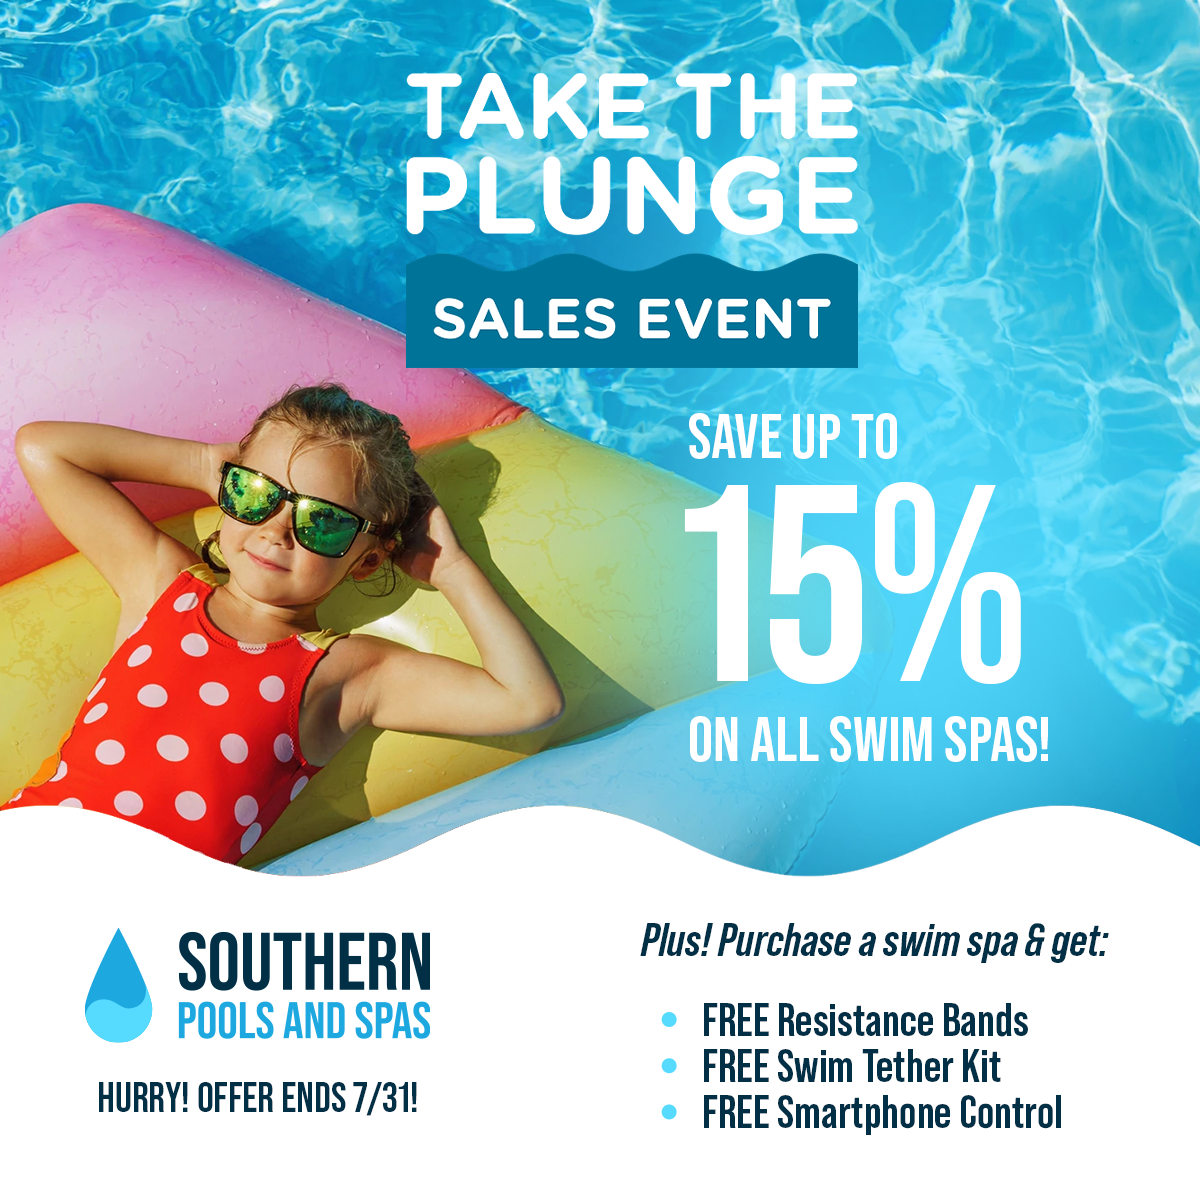 Take The Plunge Sales Event